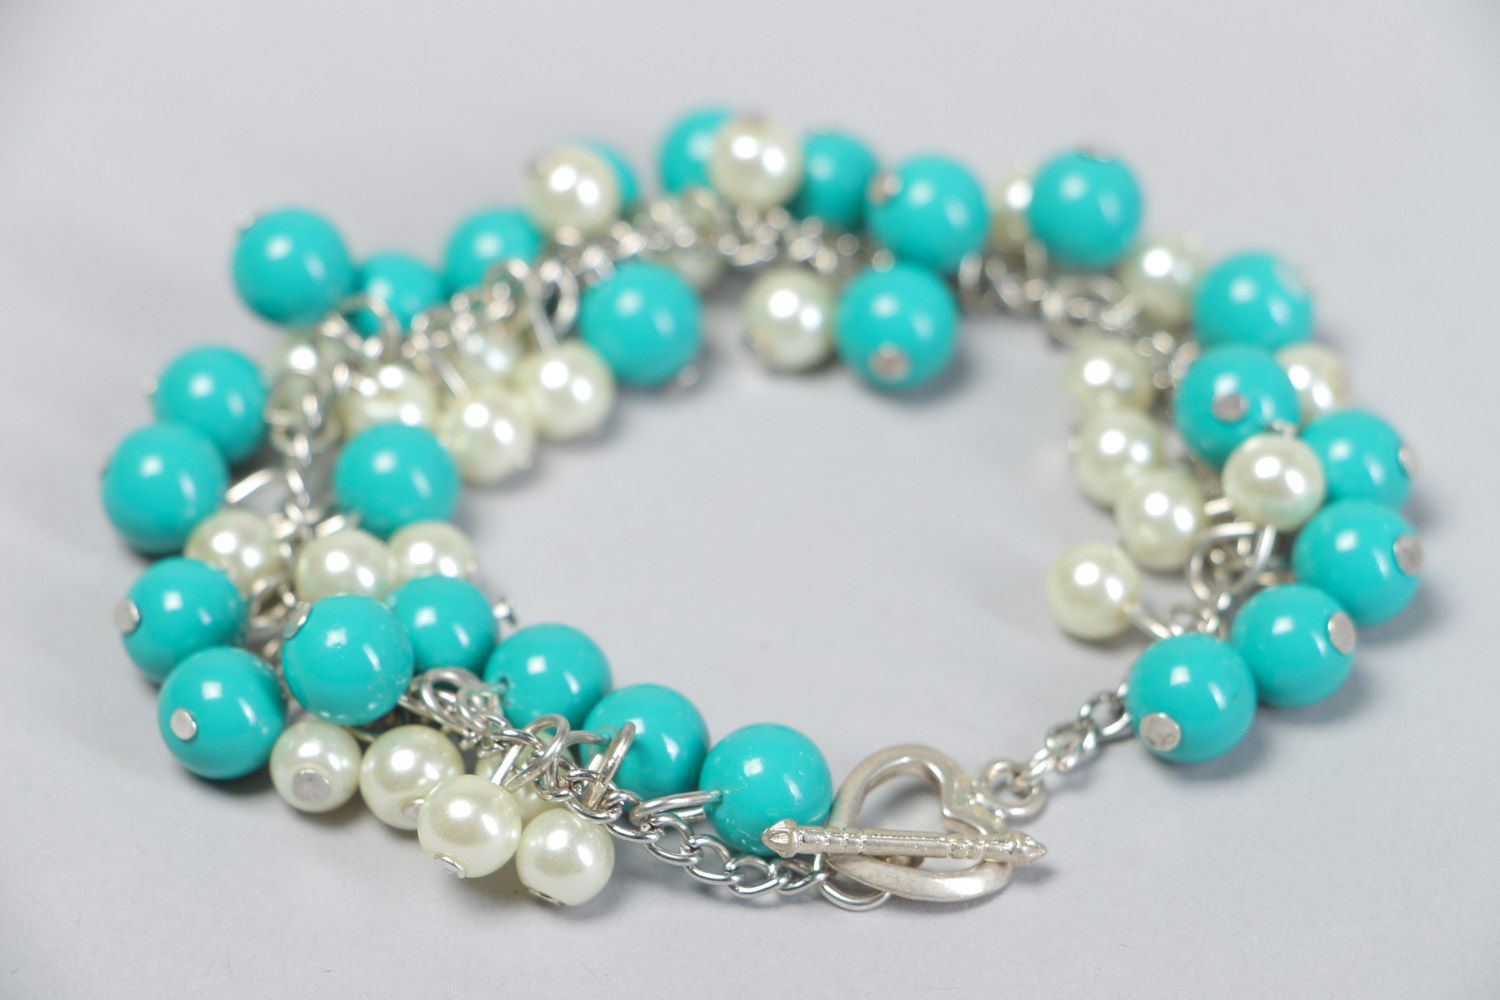 Handmade bright stylish beaded wrist bracelet with charms of turquoise and white colors photo 4